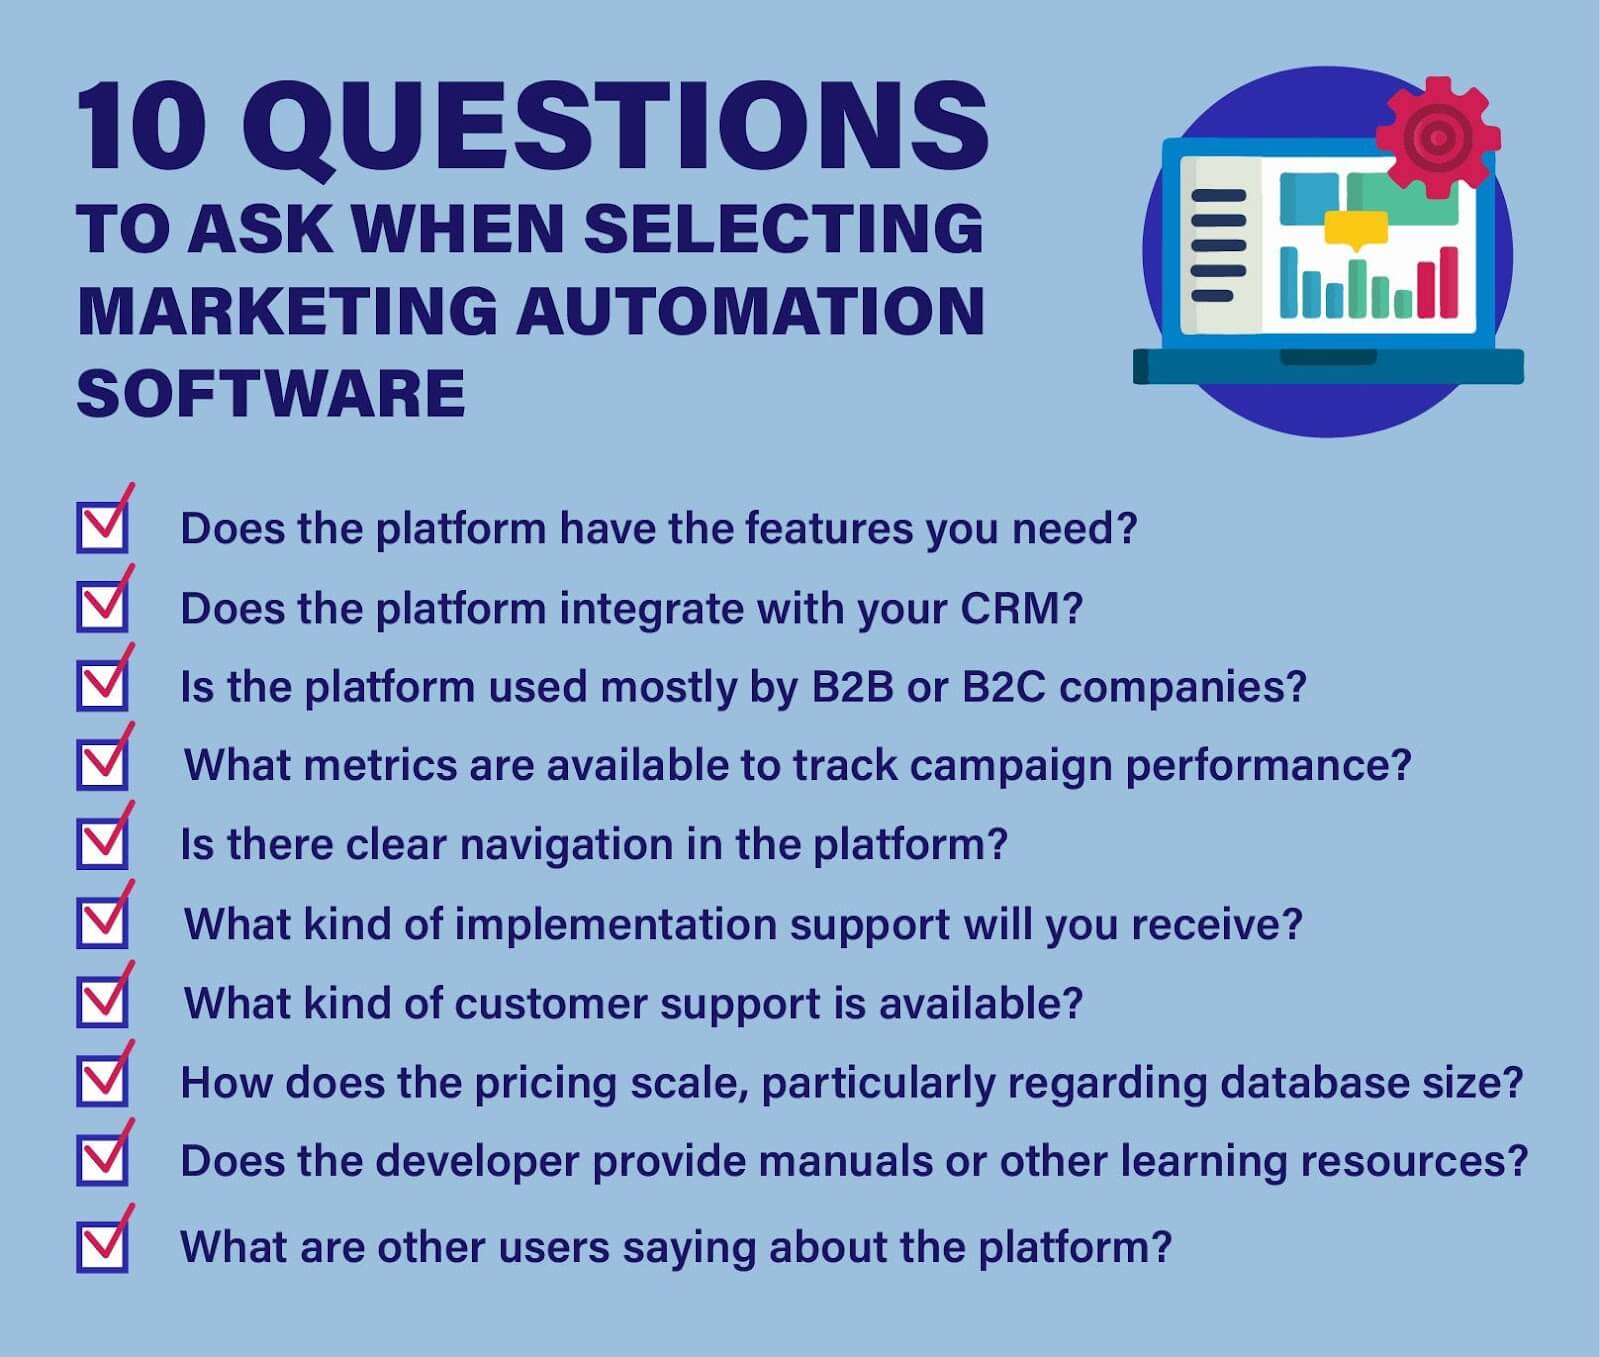 3. Factors to Consider When Choosing Marketing Software